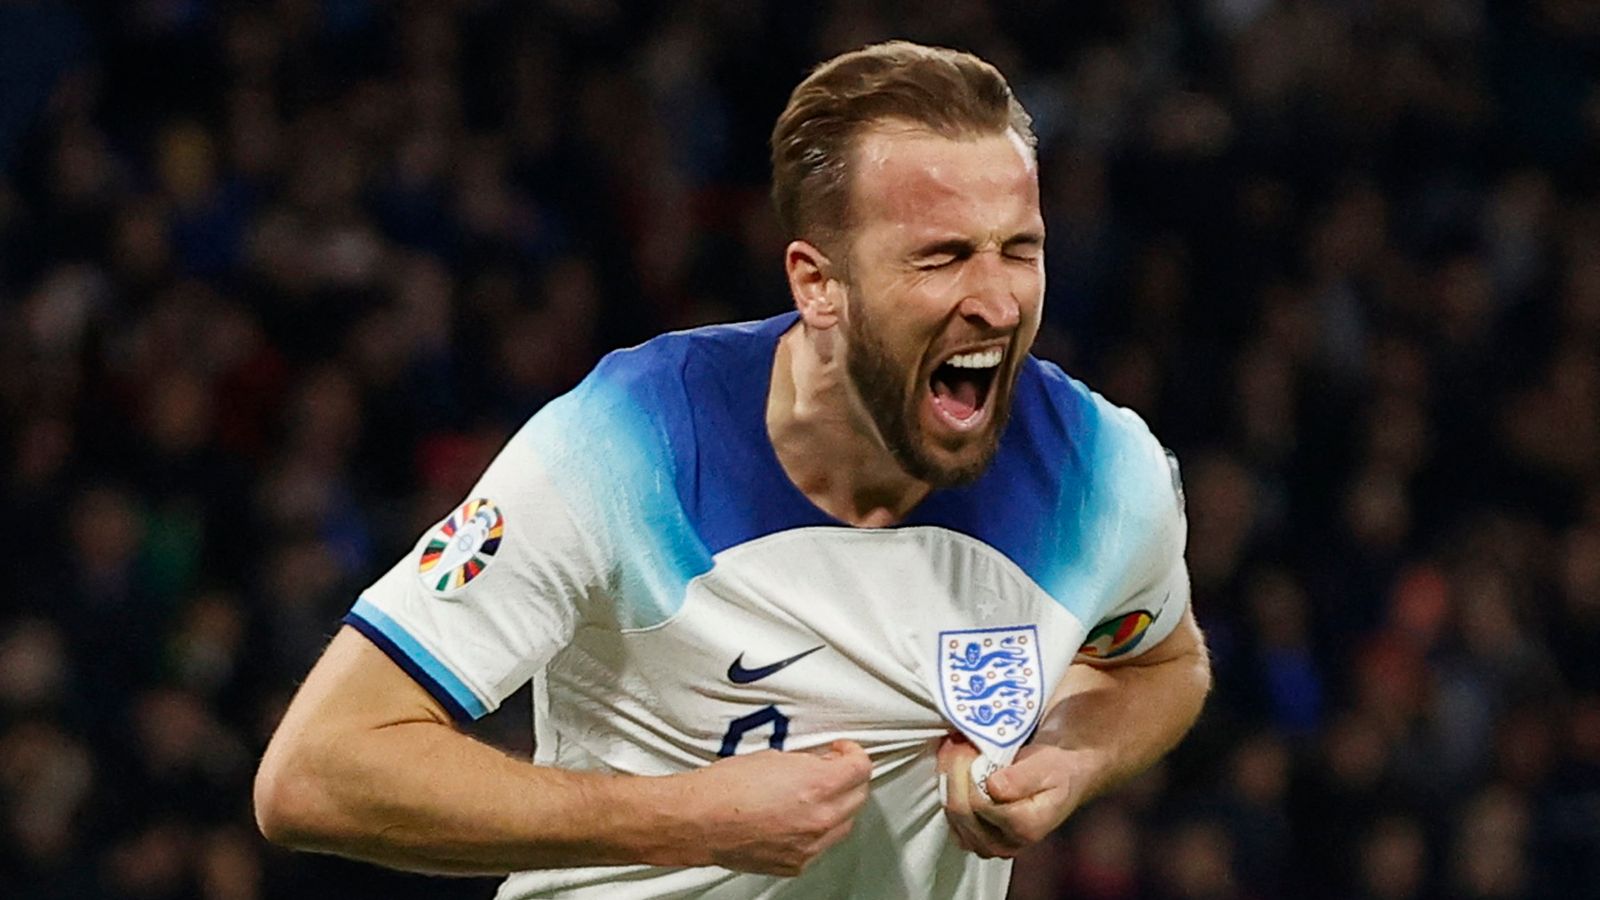 Harry Kane becomes England men's record goalscorer after scoring against Italy